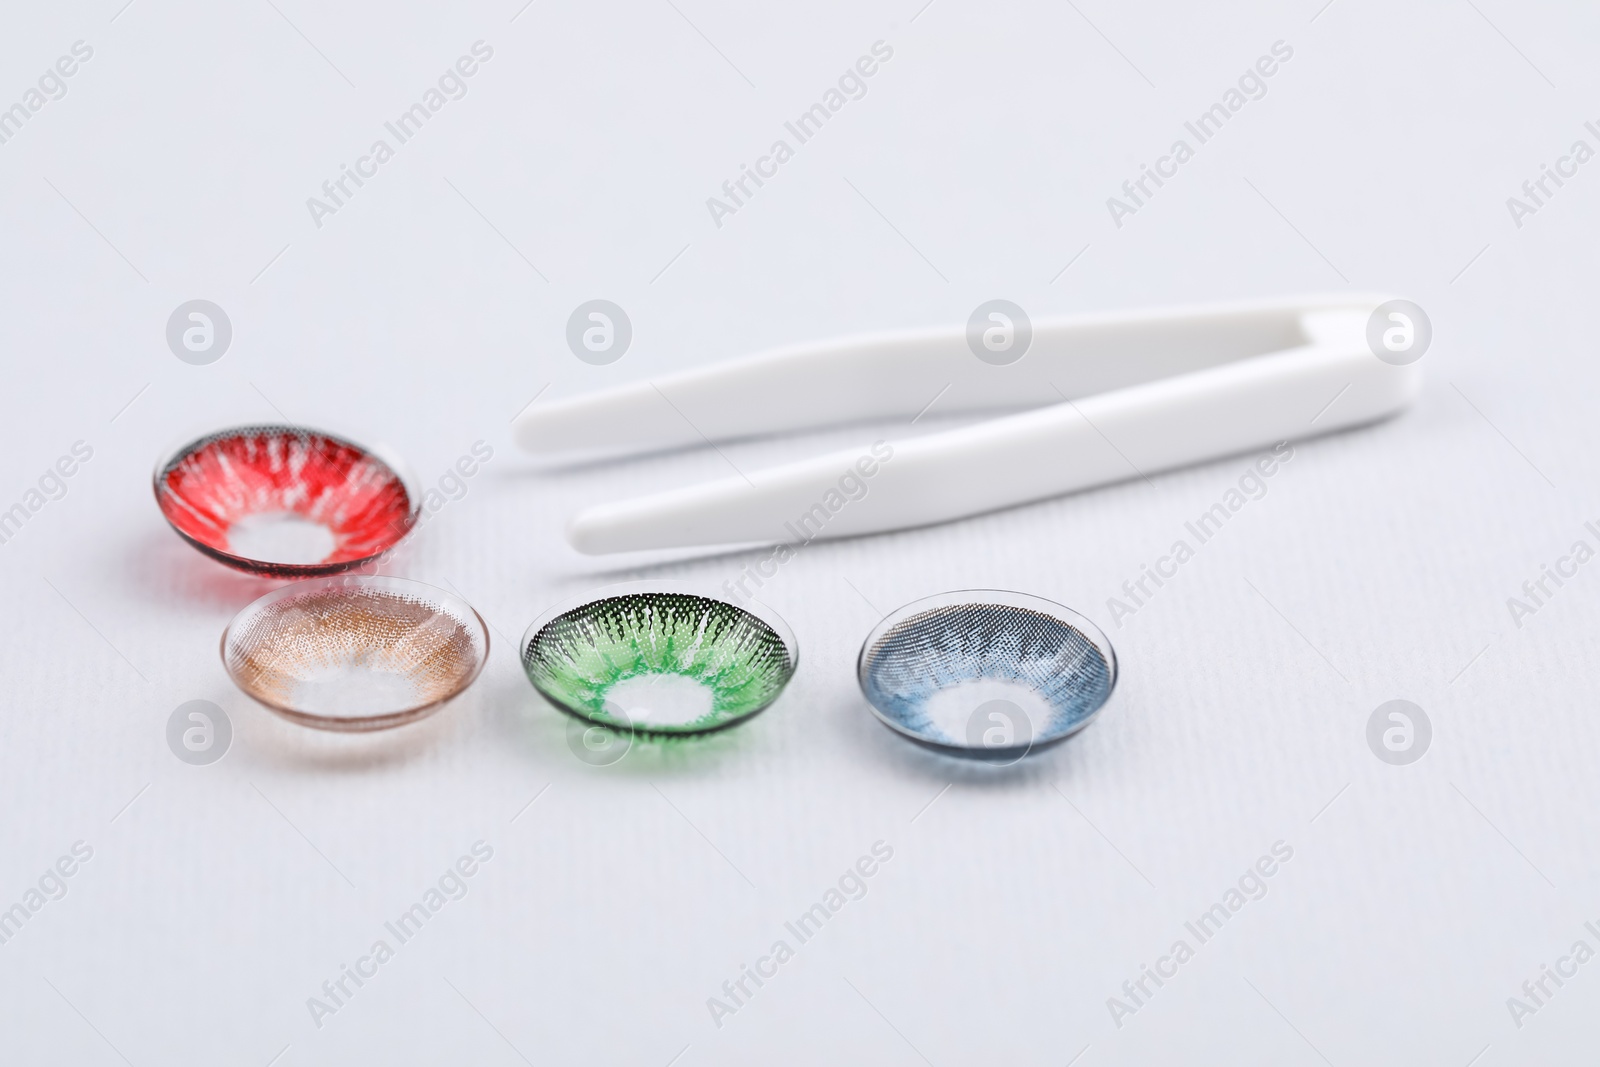 Photo of Different color contact lenses and tweezers on white background